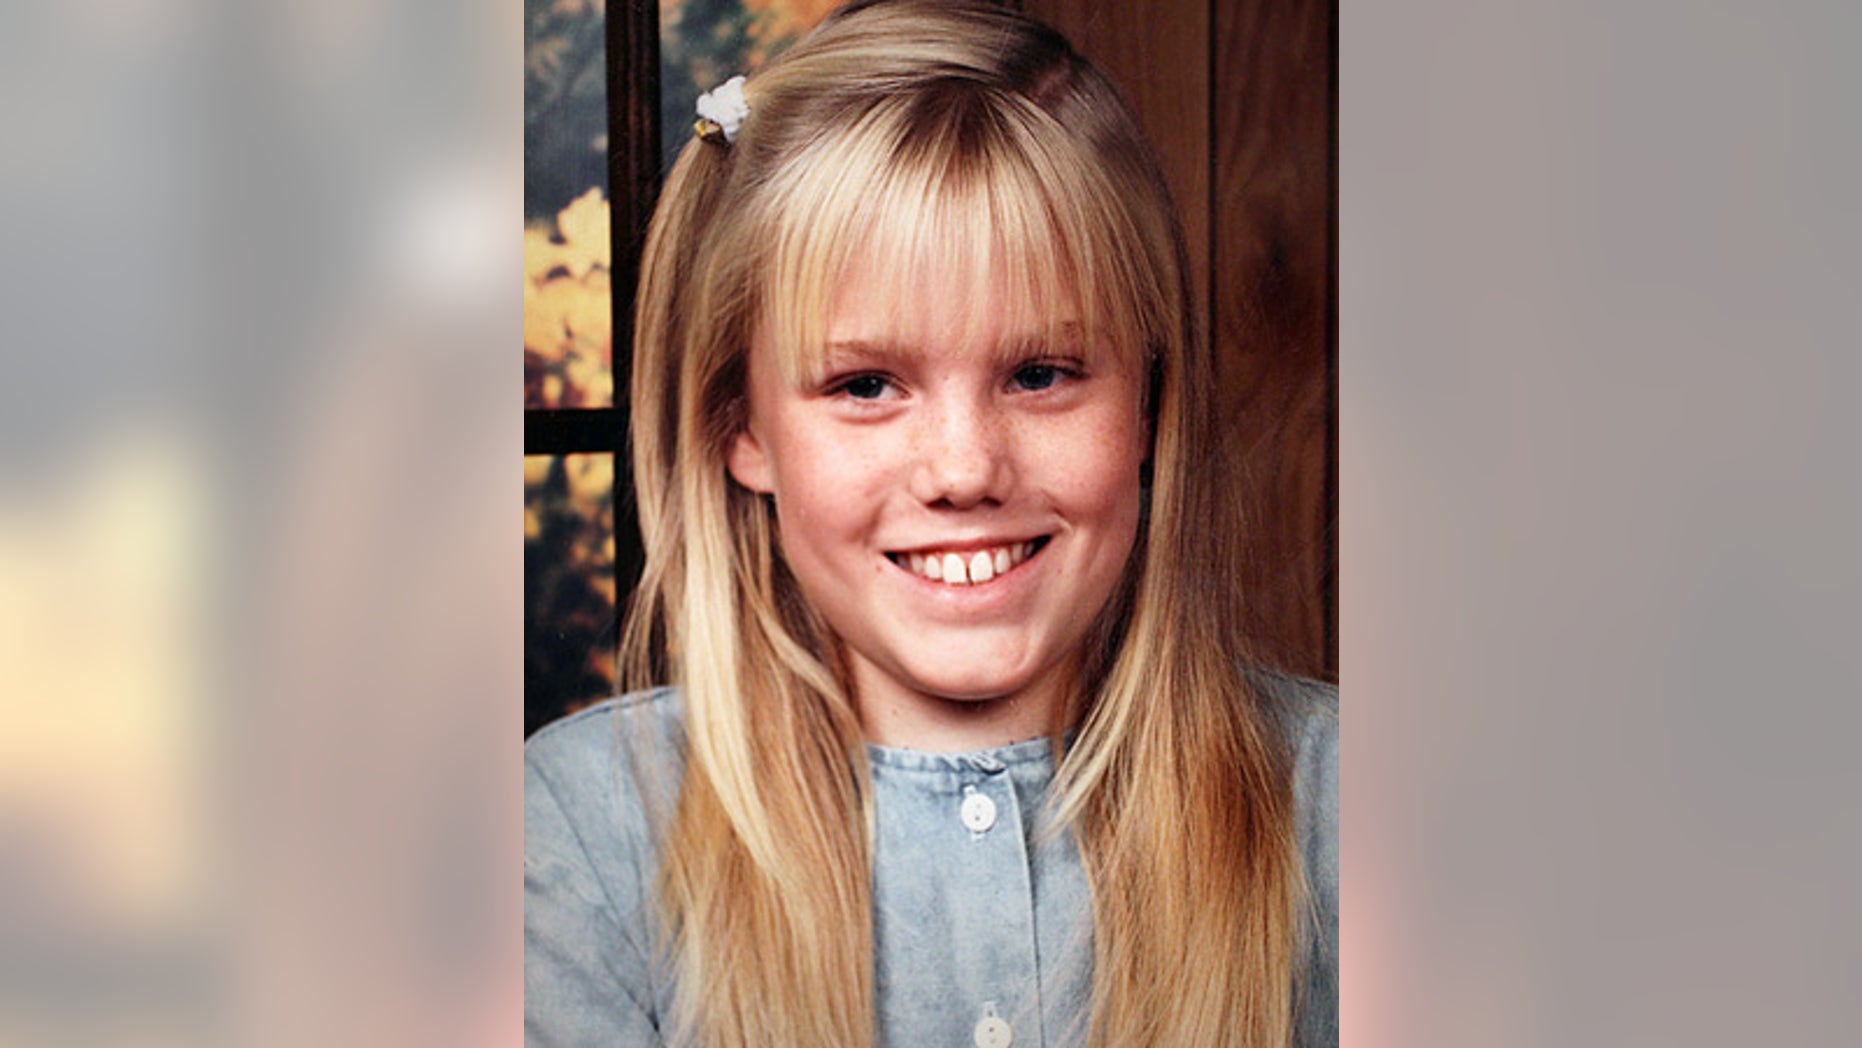 Police Look at Jaycee Dugard's Accused Kidnapper in Unsolved Cases